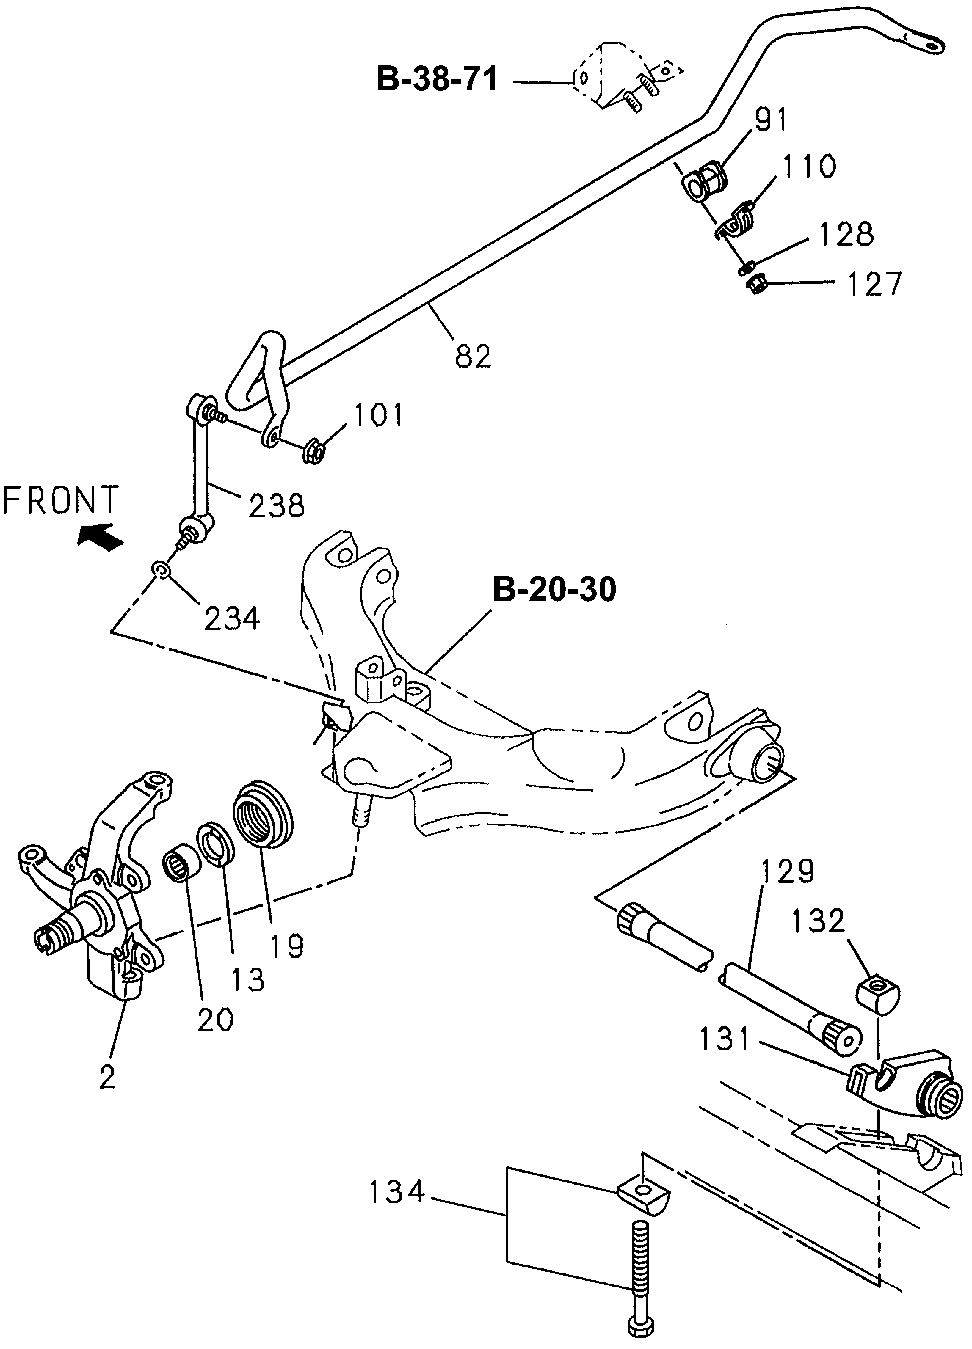 8-97138-330-0 - ARM, L. HEIGHT CONTROL